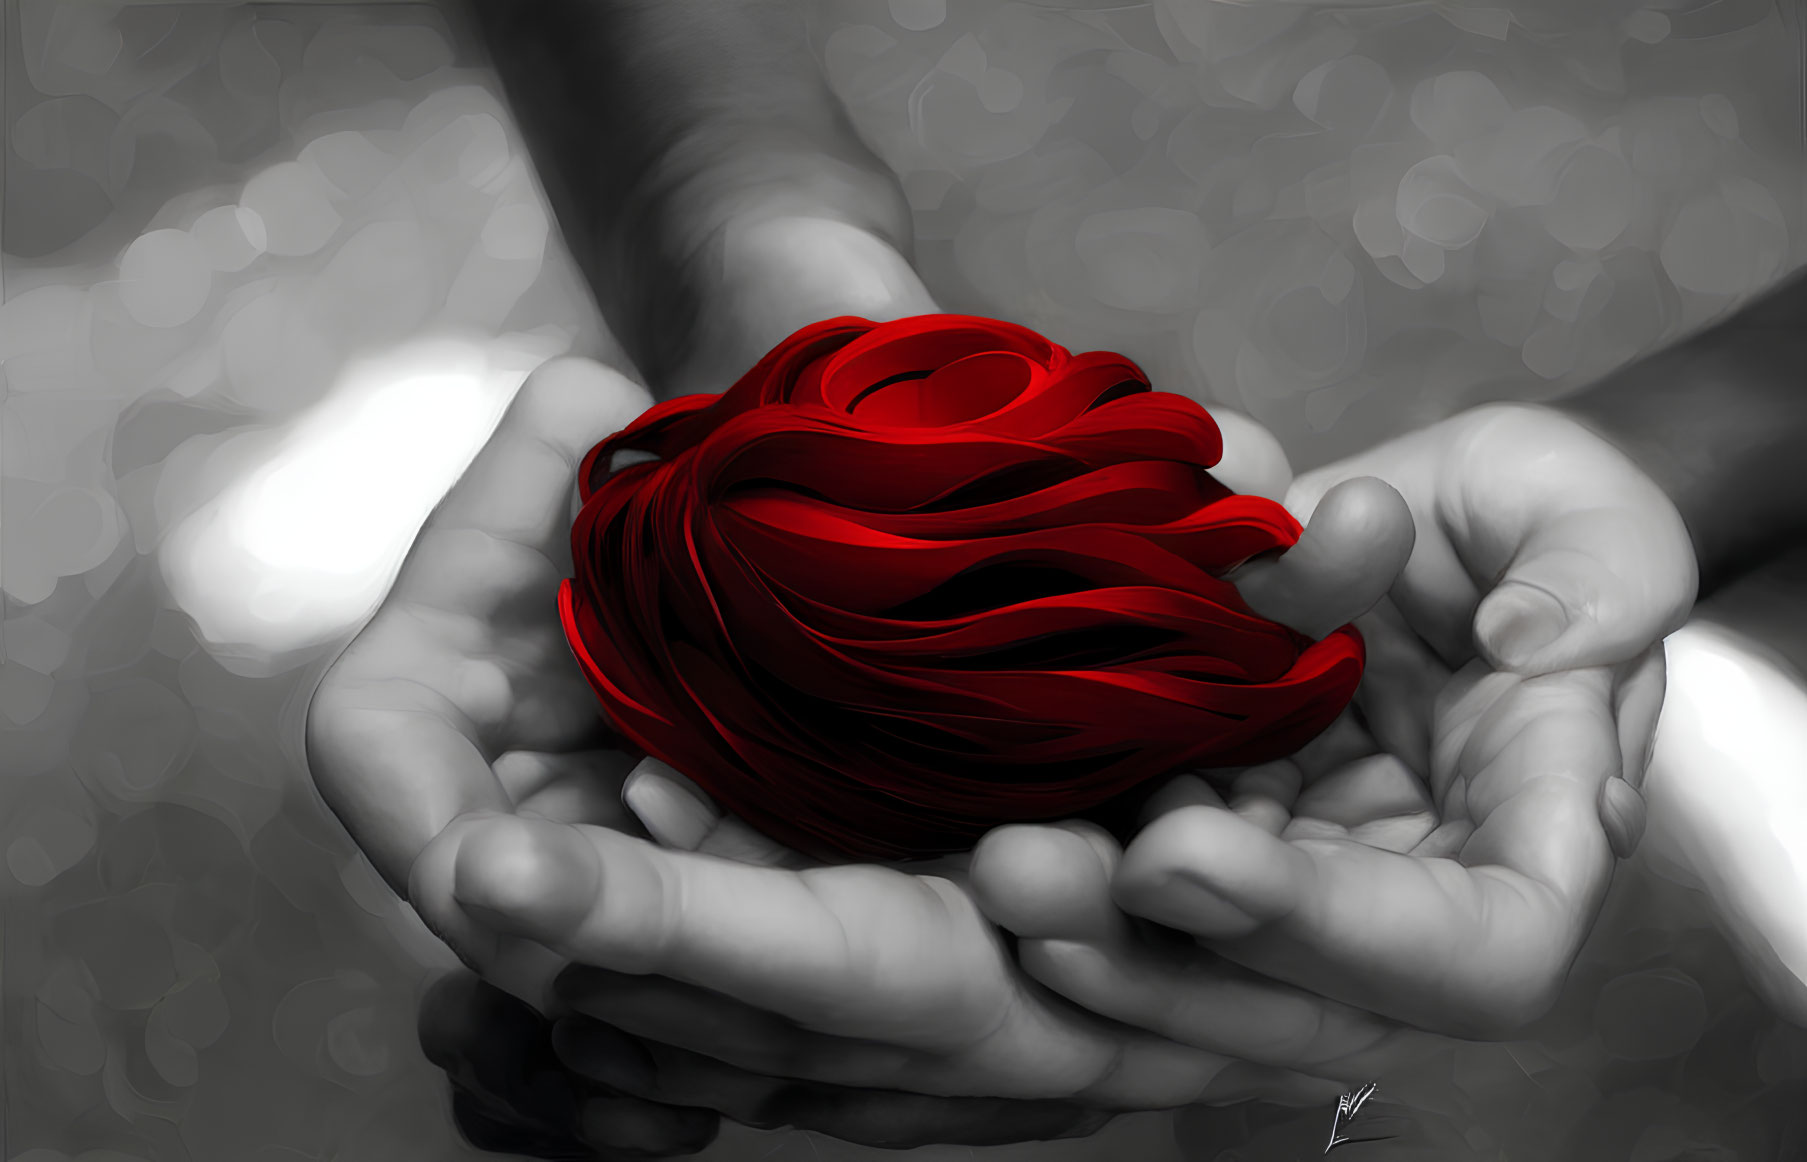 Hands holding red flower on blurred background: Vibrant floral imagery